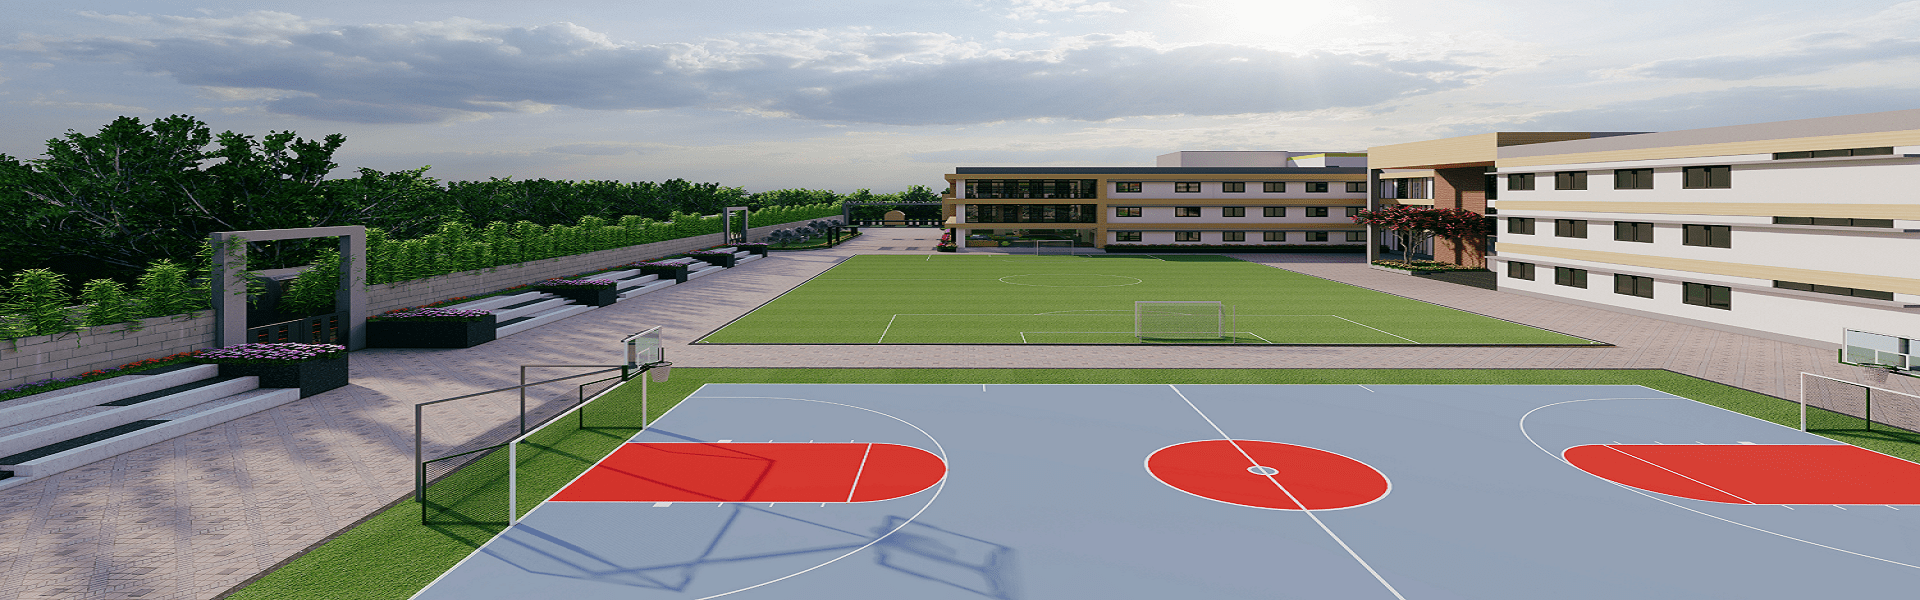 School design in India by The school designs studio | OUR SERVICES|